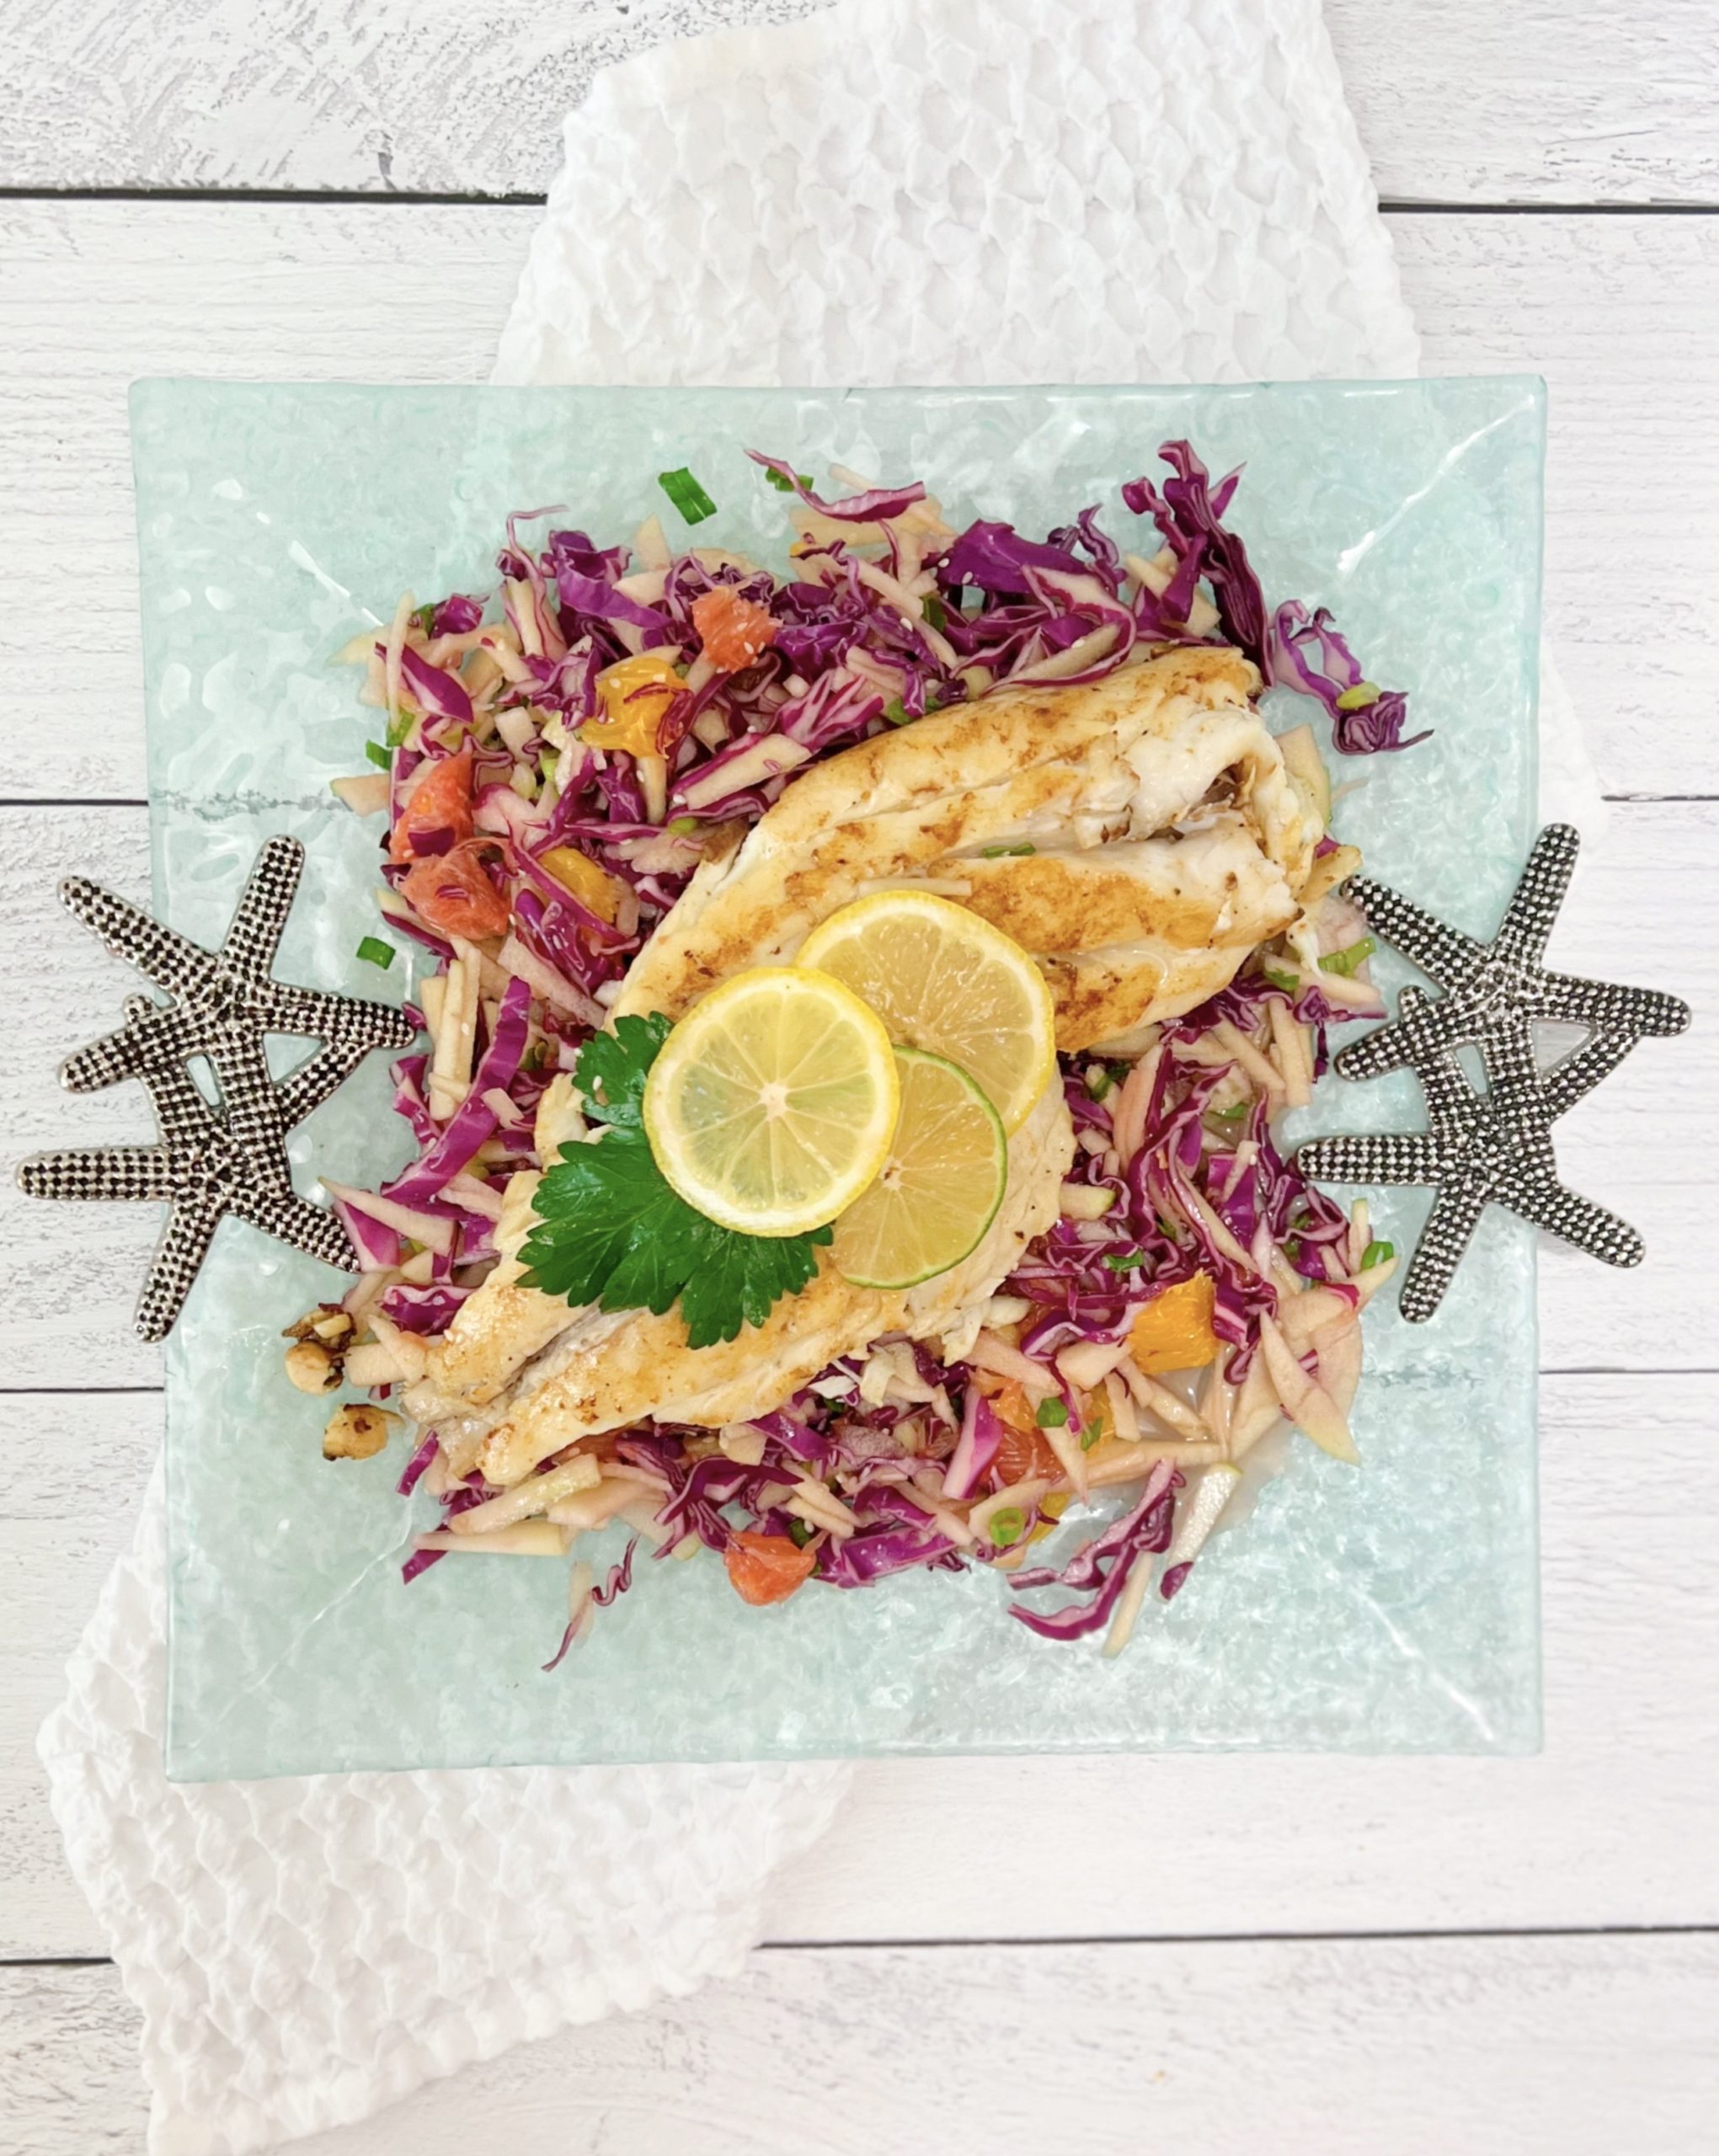 Grilled Red Snapper with Green Apple Citrus Slaw